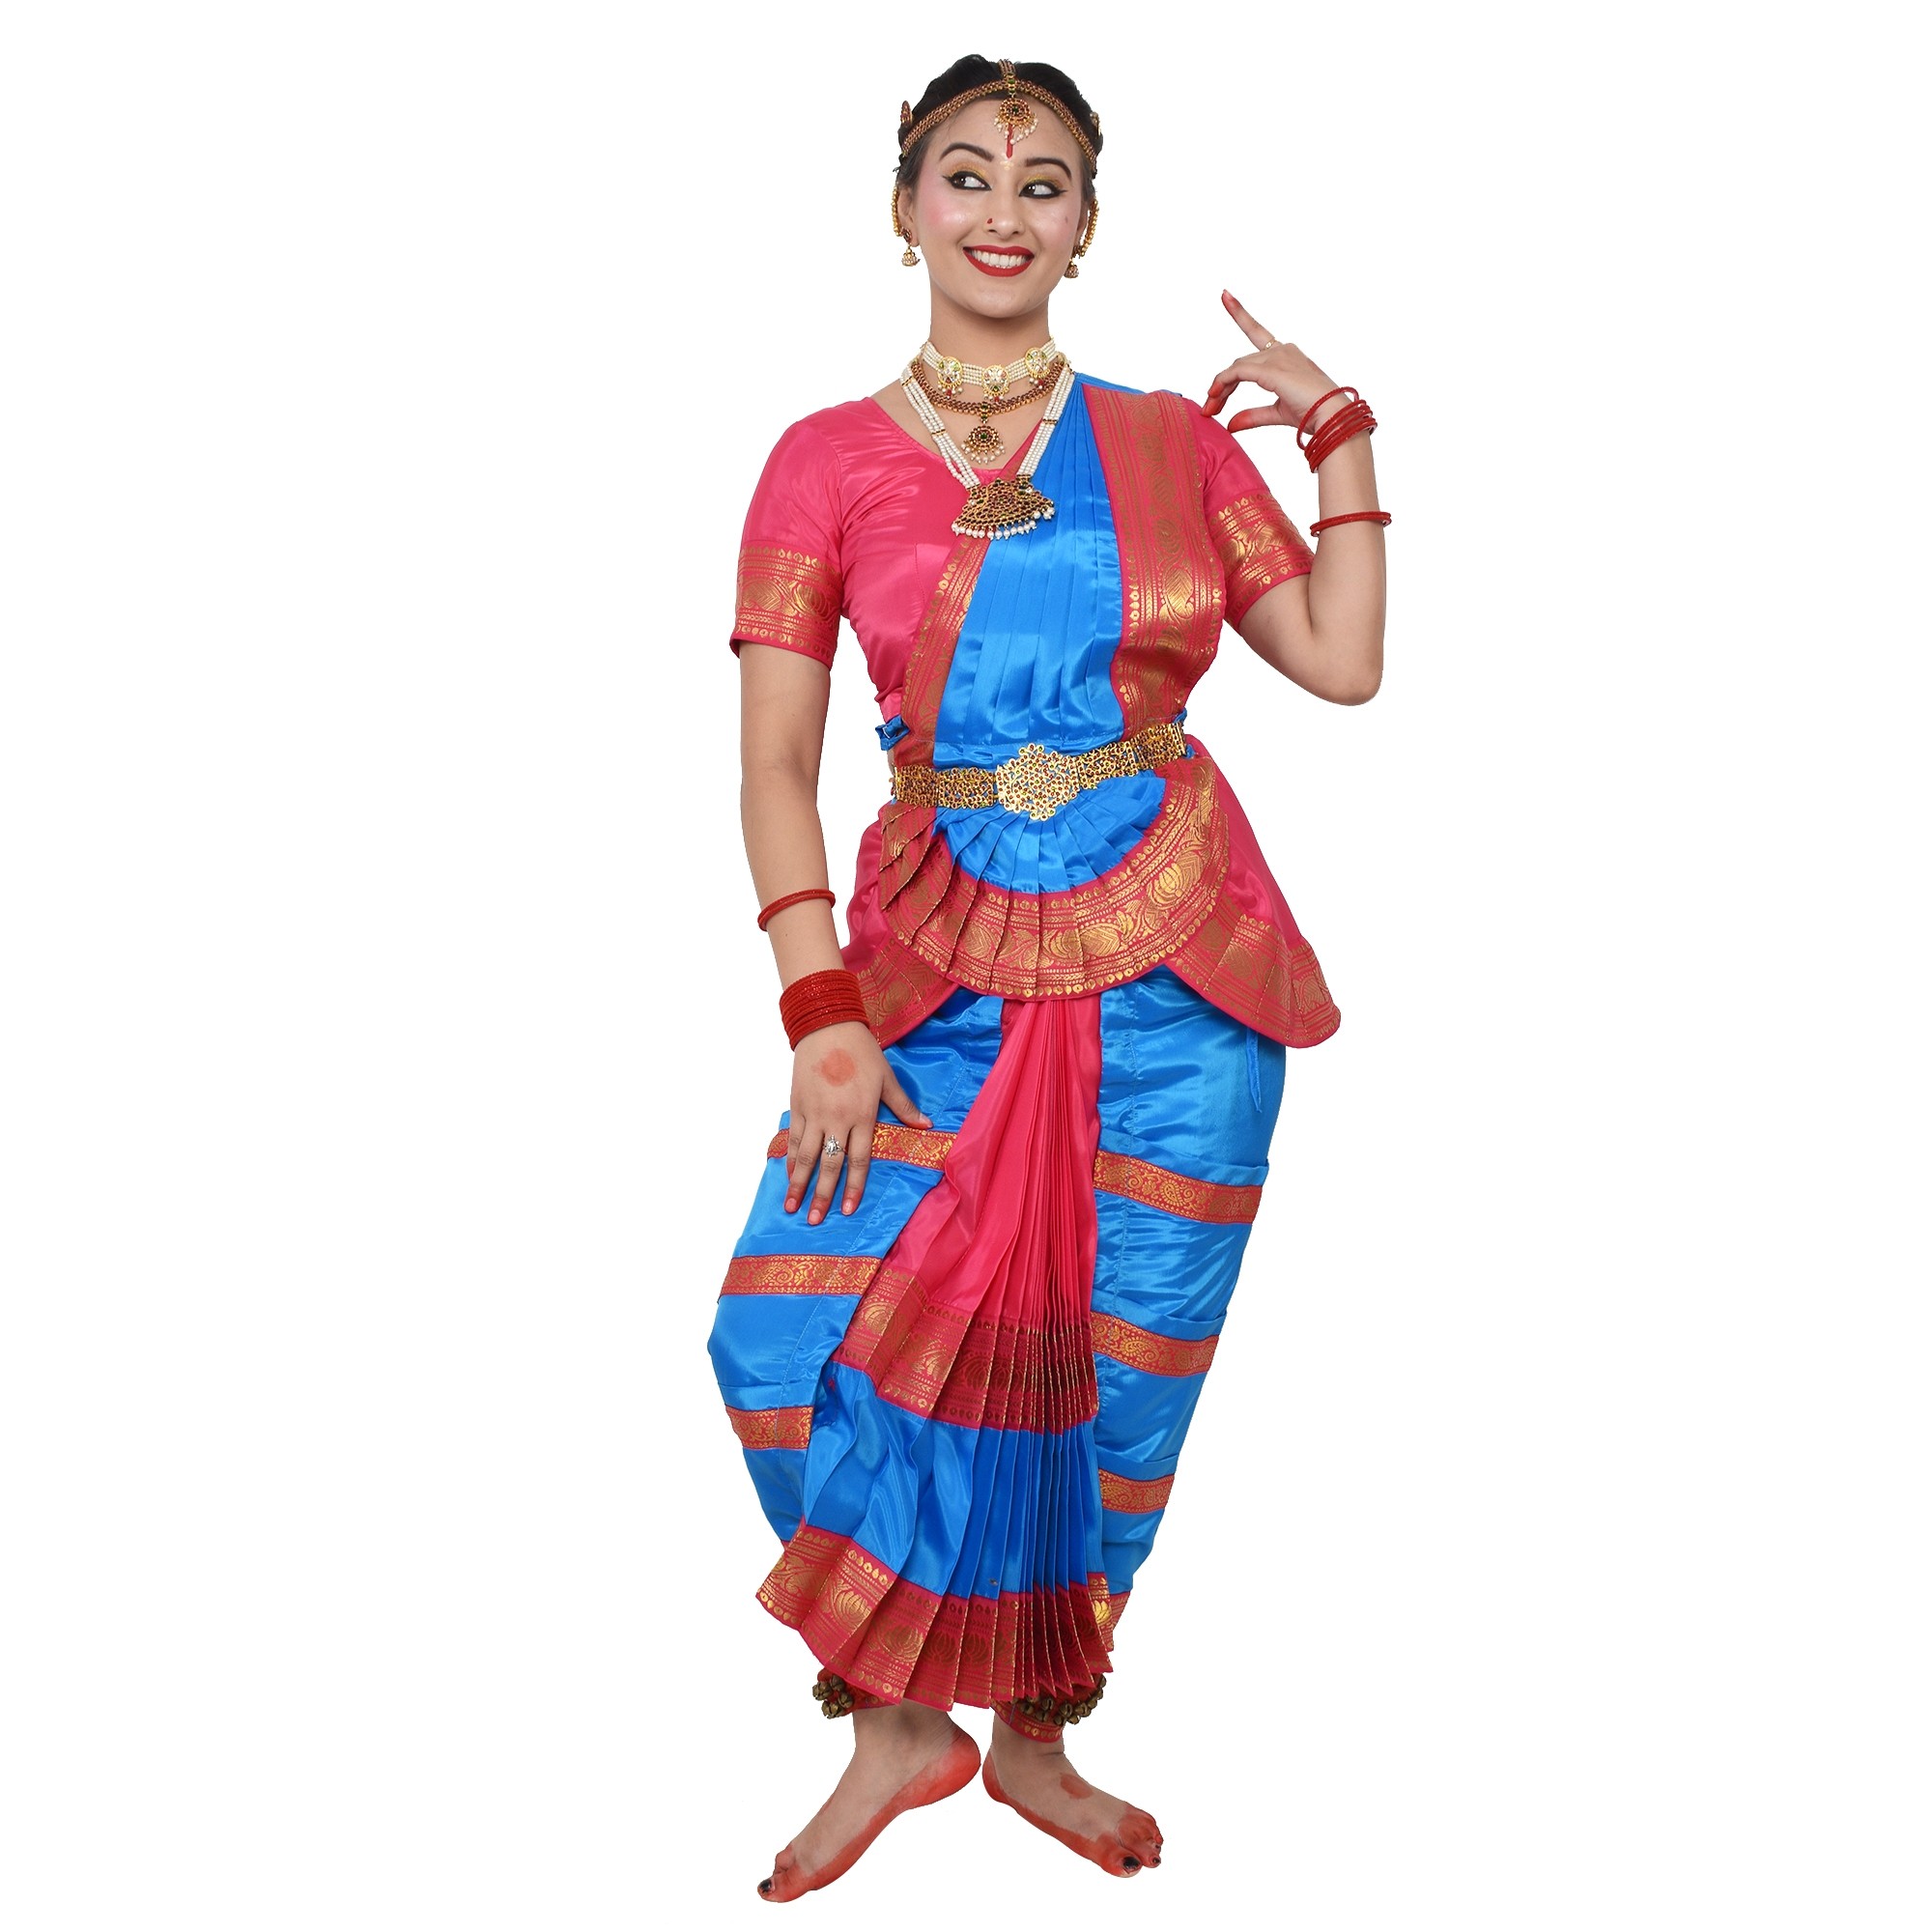 Invocation to almighty through bharatanatyam | Events Movie News - Times of  India